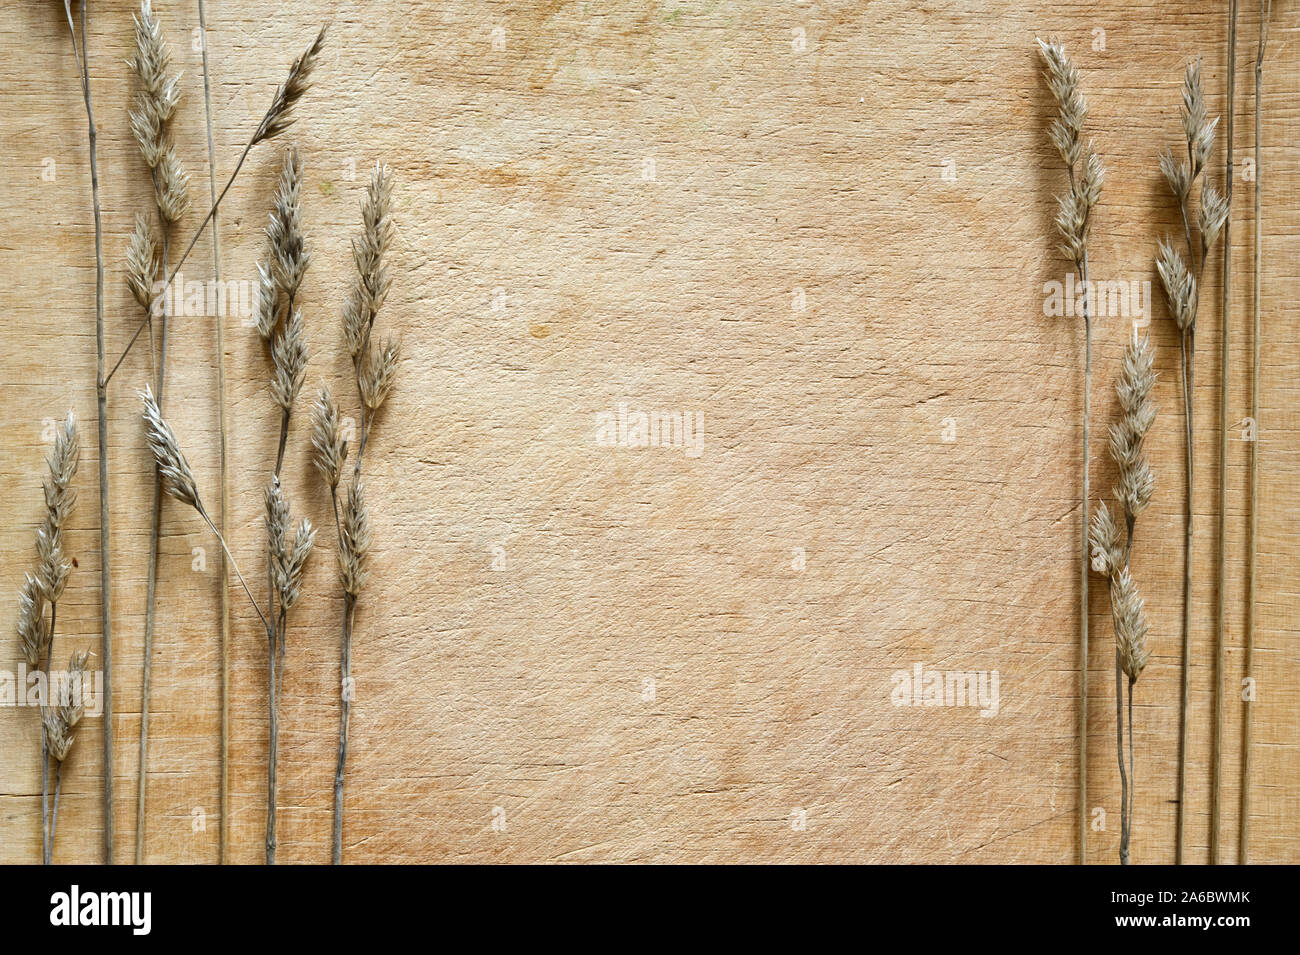 Dried grasses on wooden background. Stock Photo